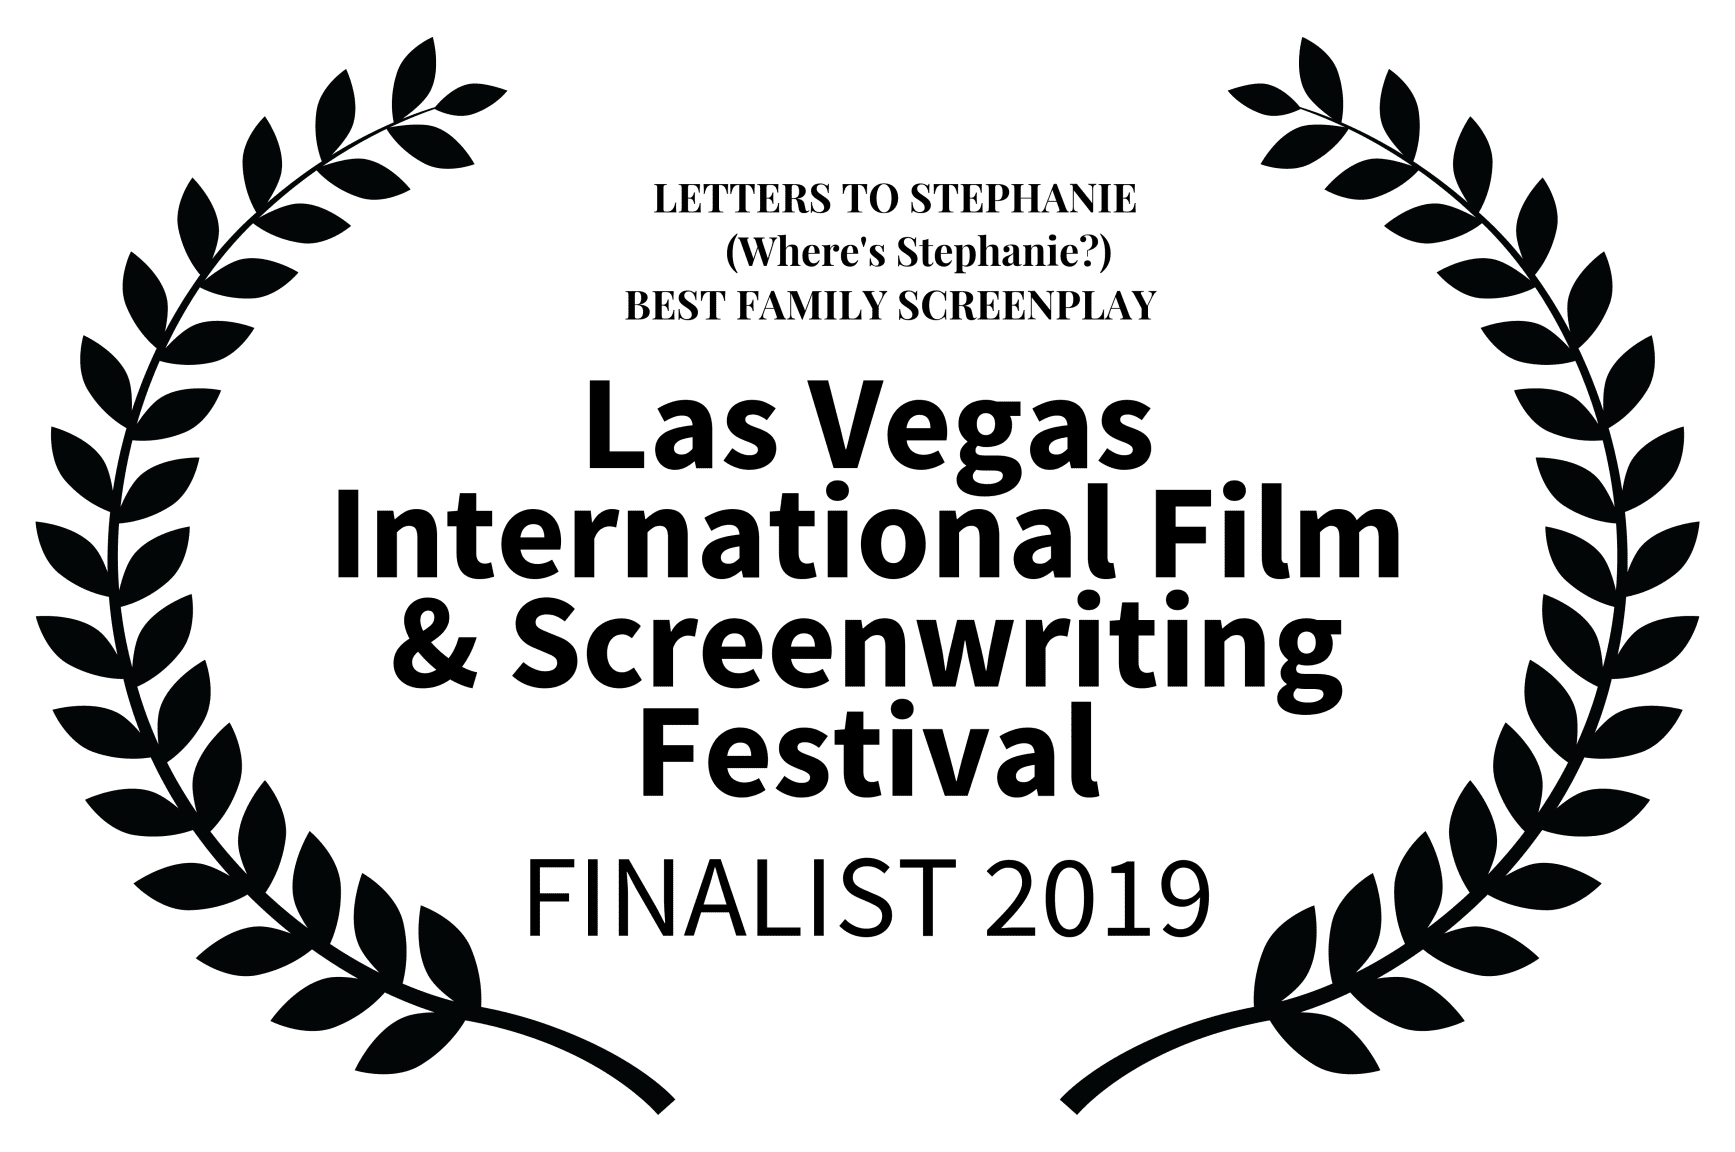 A green background with black leaves and the words las vegas international film & screenwriting festival finalist 2 0 1 9.